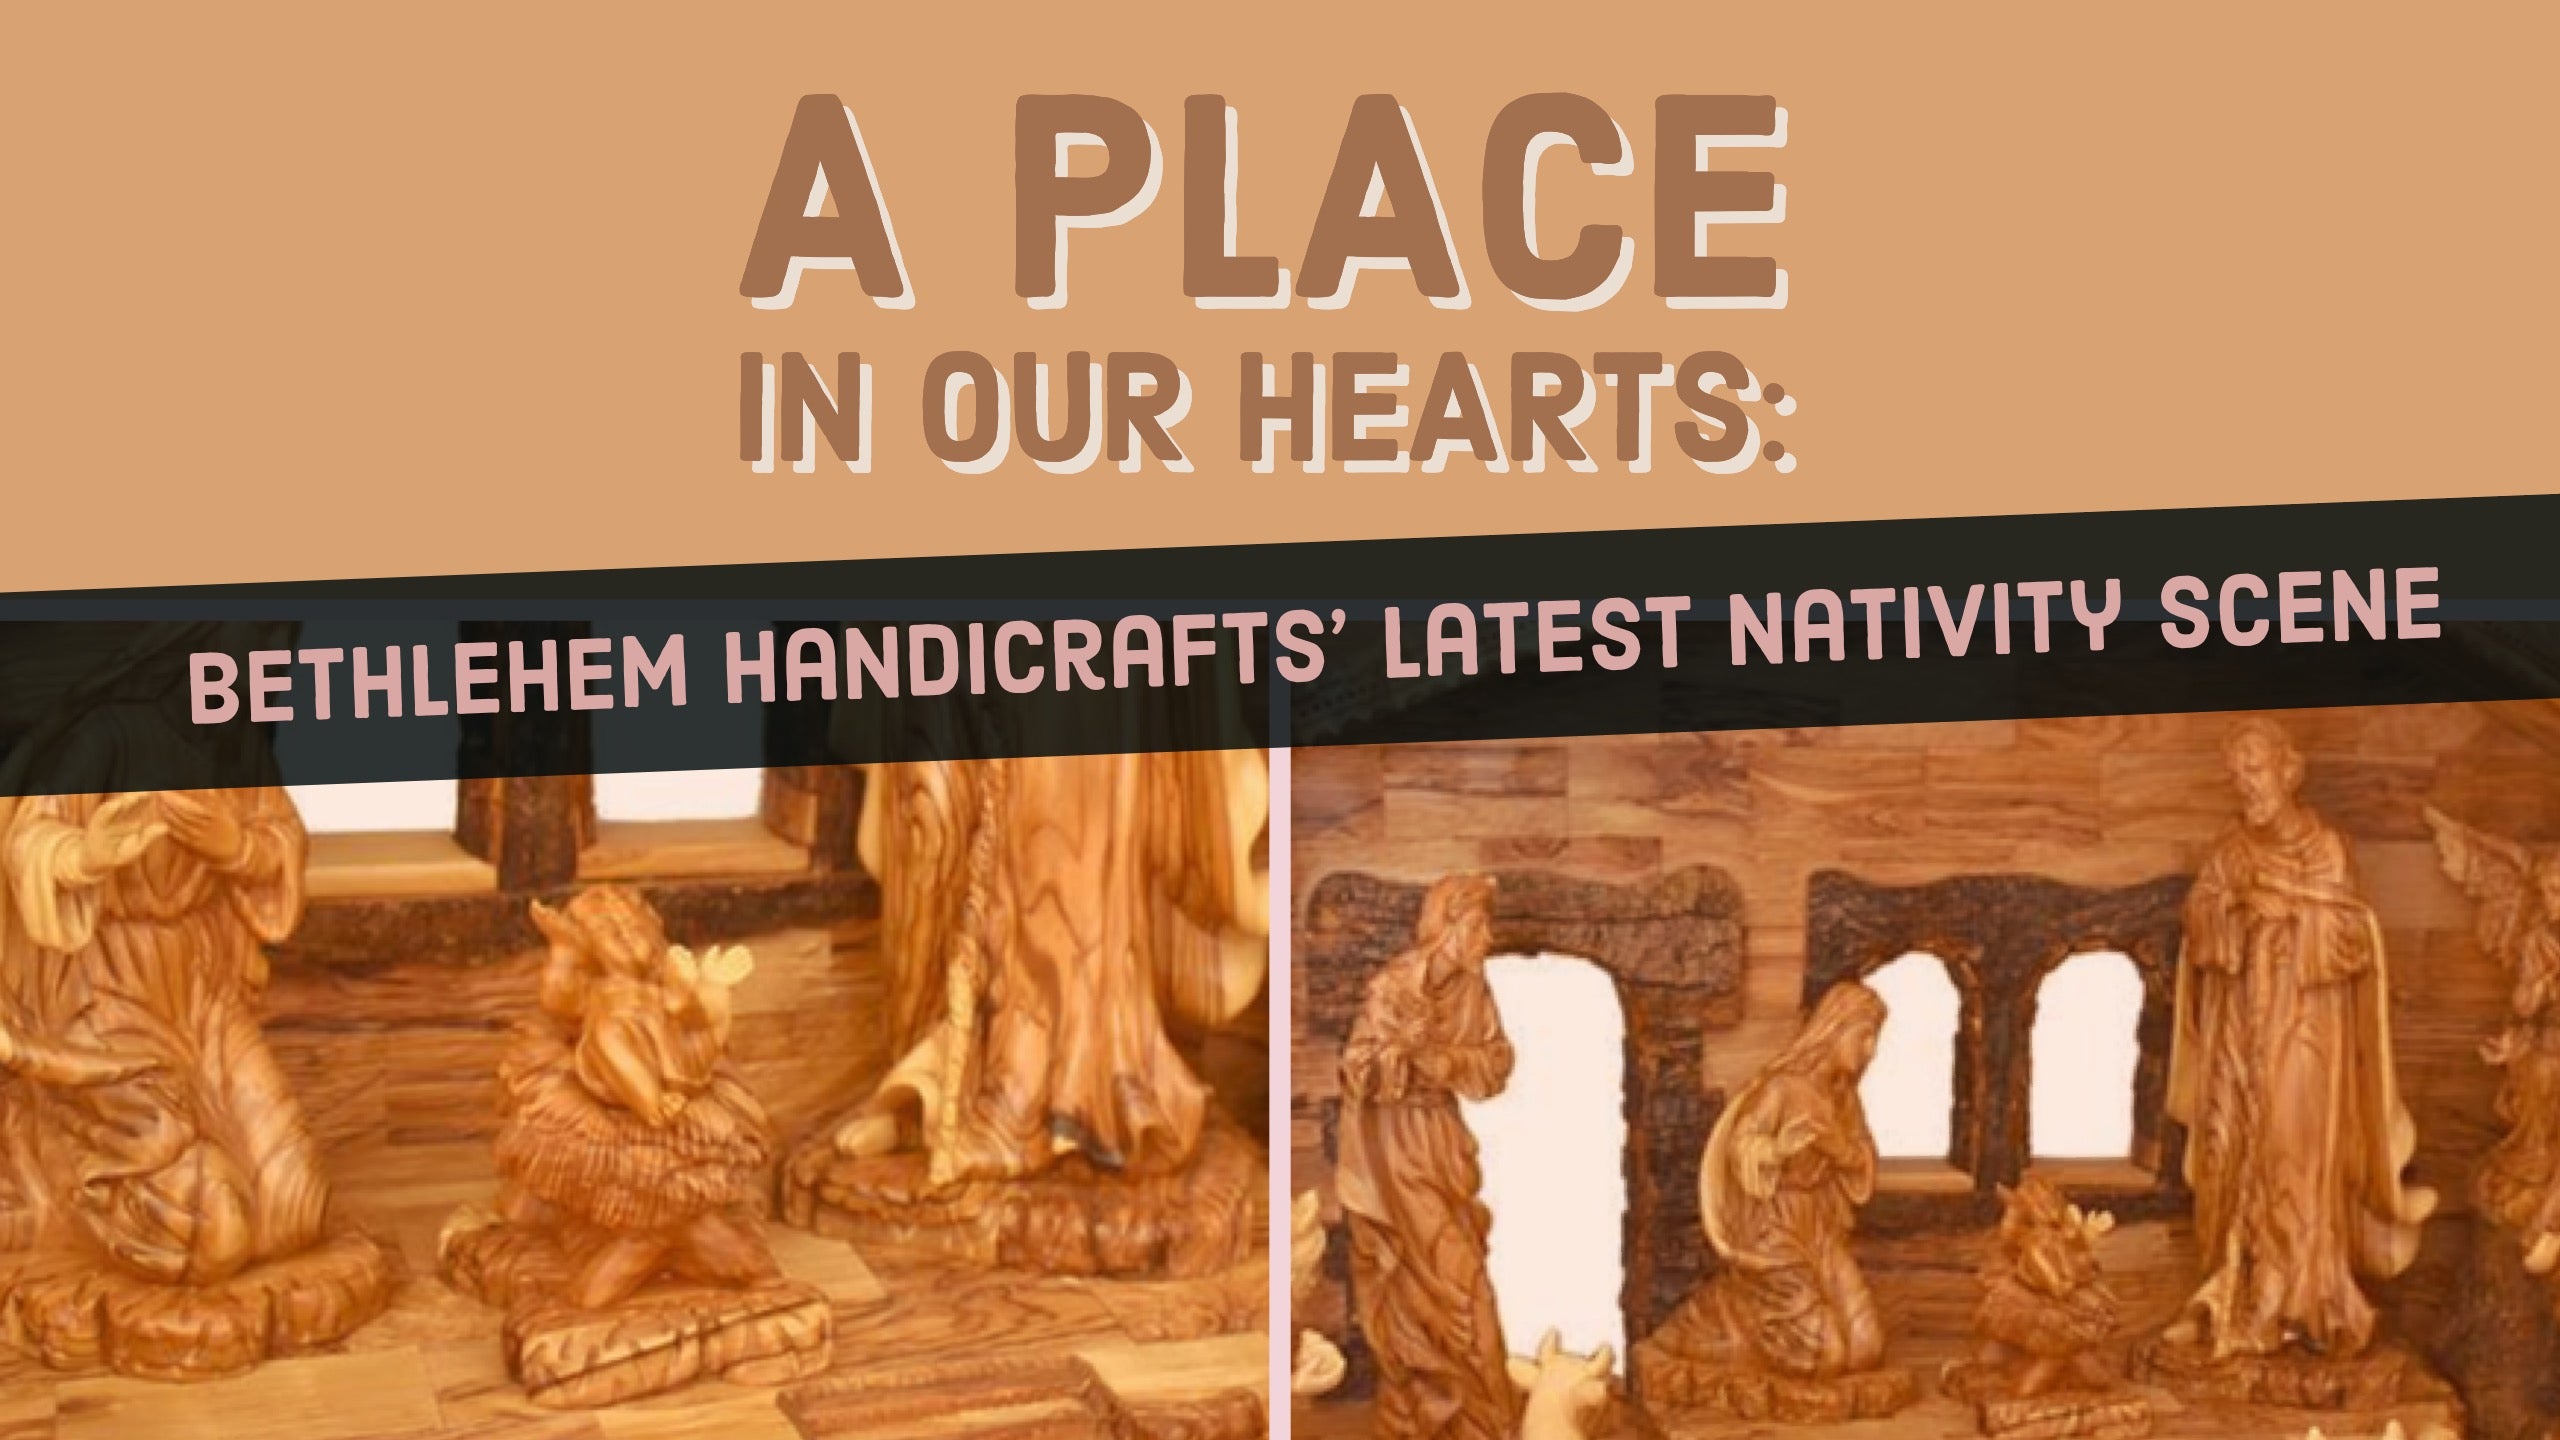 A place in our hearts: Bethlehem Handicrafts' Latest Nativity Scene